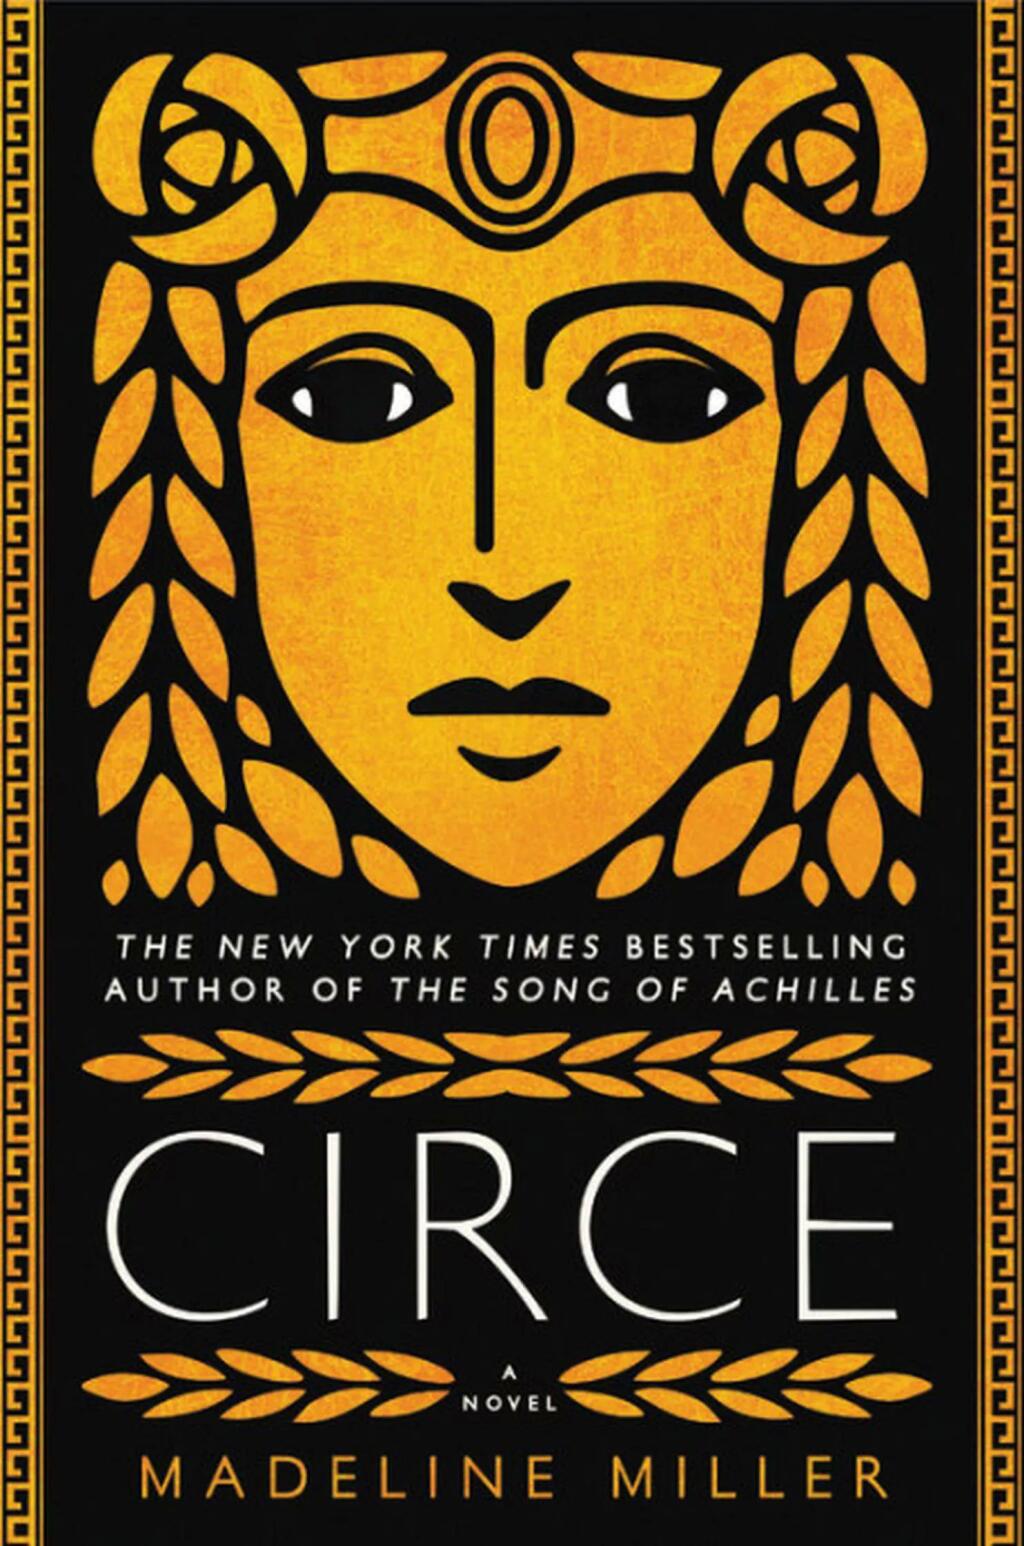 “Circe," by Madeline Miller, is this week's No. 2  bestselling book in Petaluma (COURTESY OF LITTLE, BROWN BOOKS)